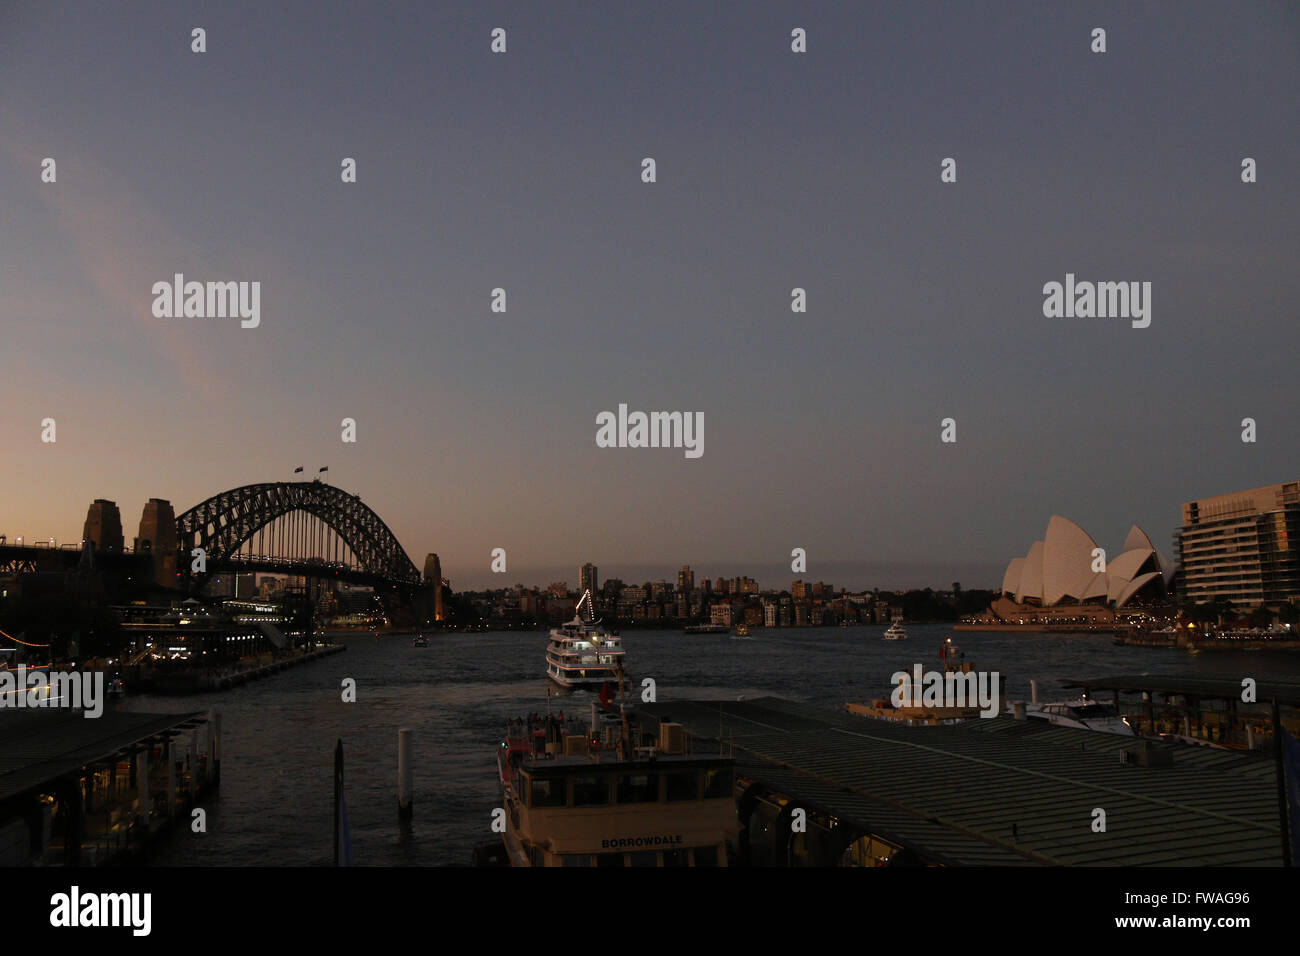 Sydney Harbour Bridge and Opera House after dark viewed from Circular Quay train station. Stock Photo